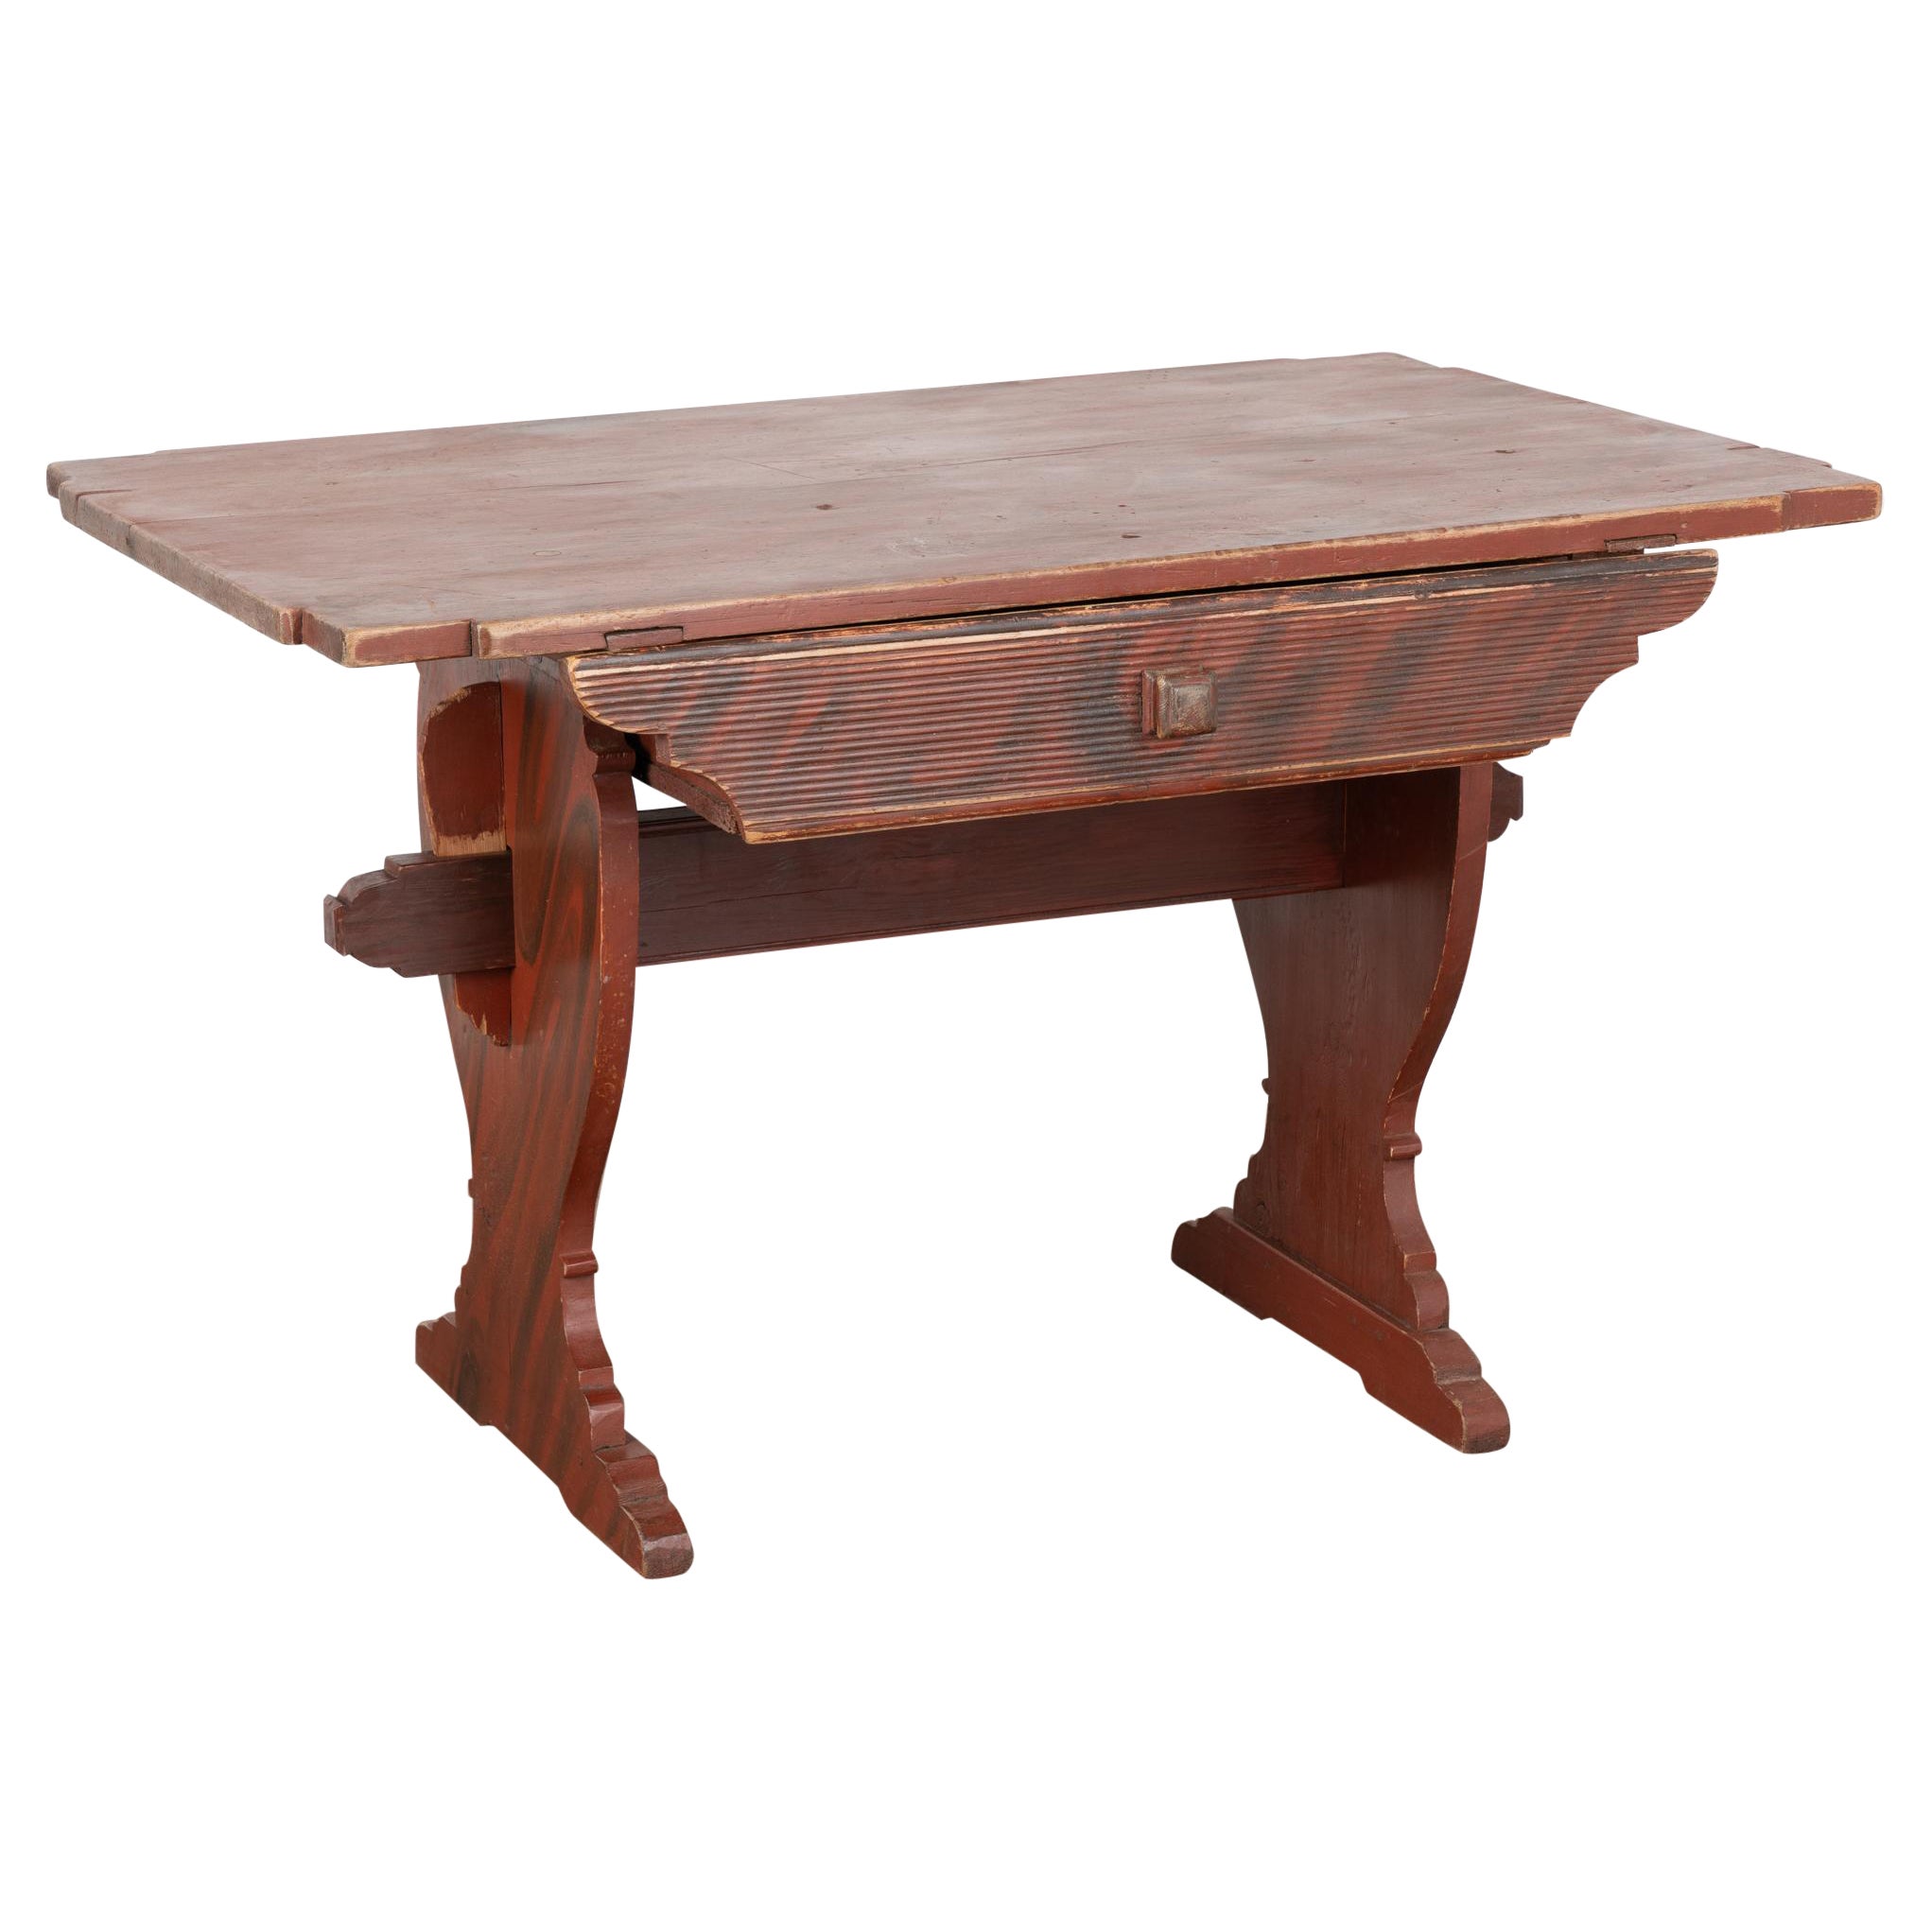 Original Red Painted Farm Table With Drawer, Sweden circa 1820-40 For Sale